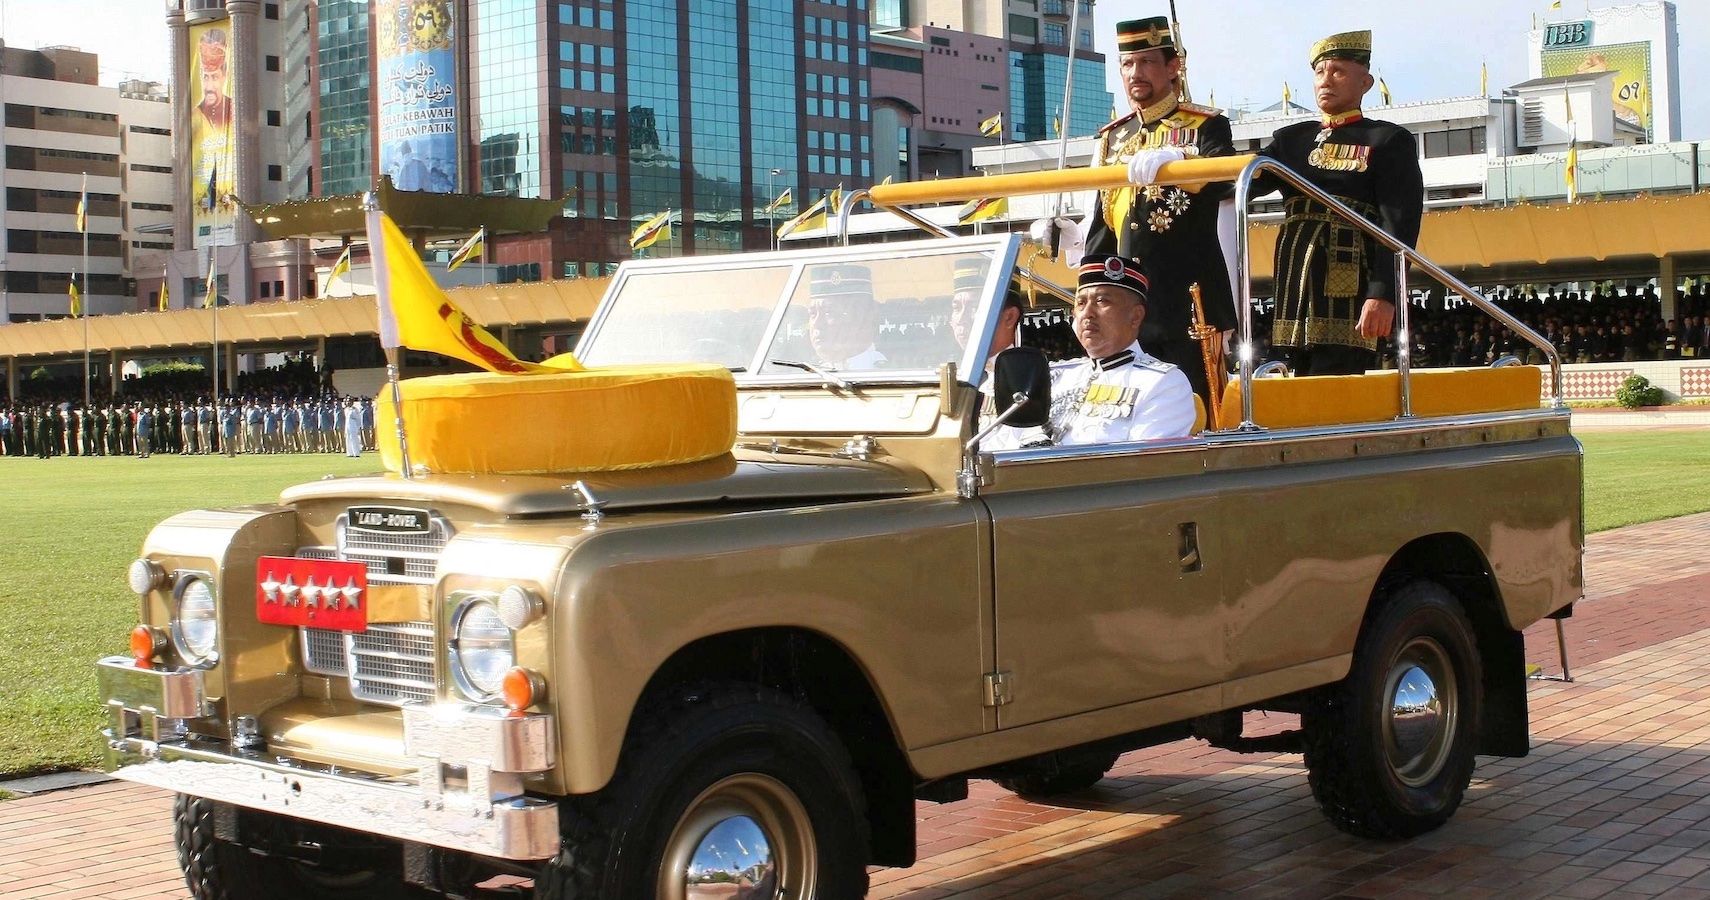 Here's The Sultan Of Brunei's Net Worth And Overall Cost Of His Car